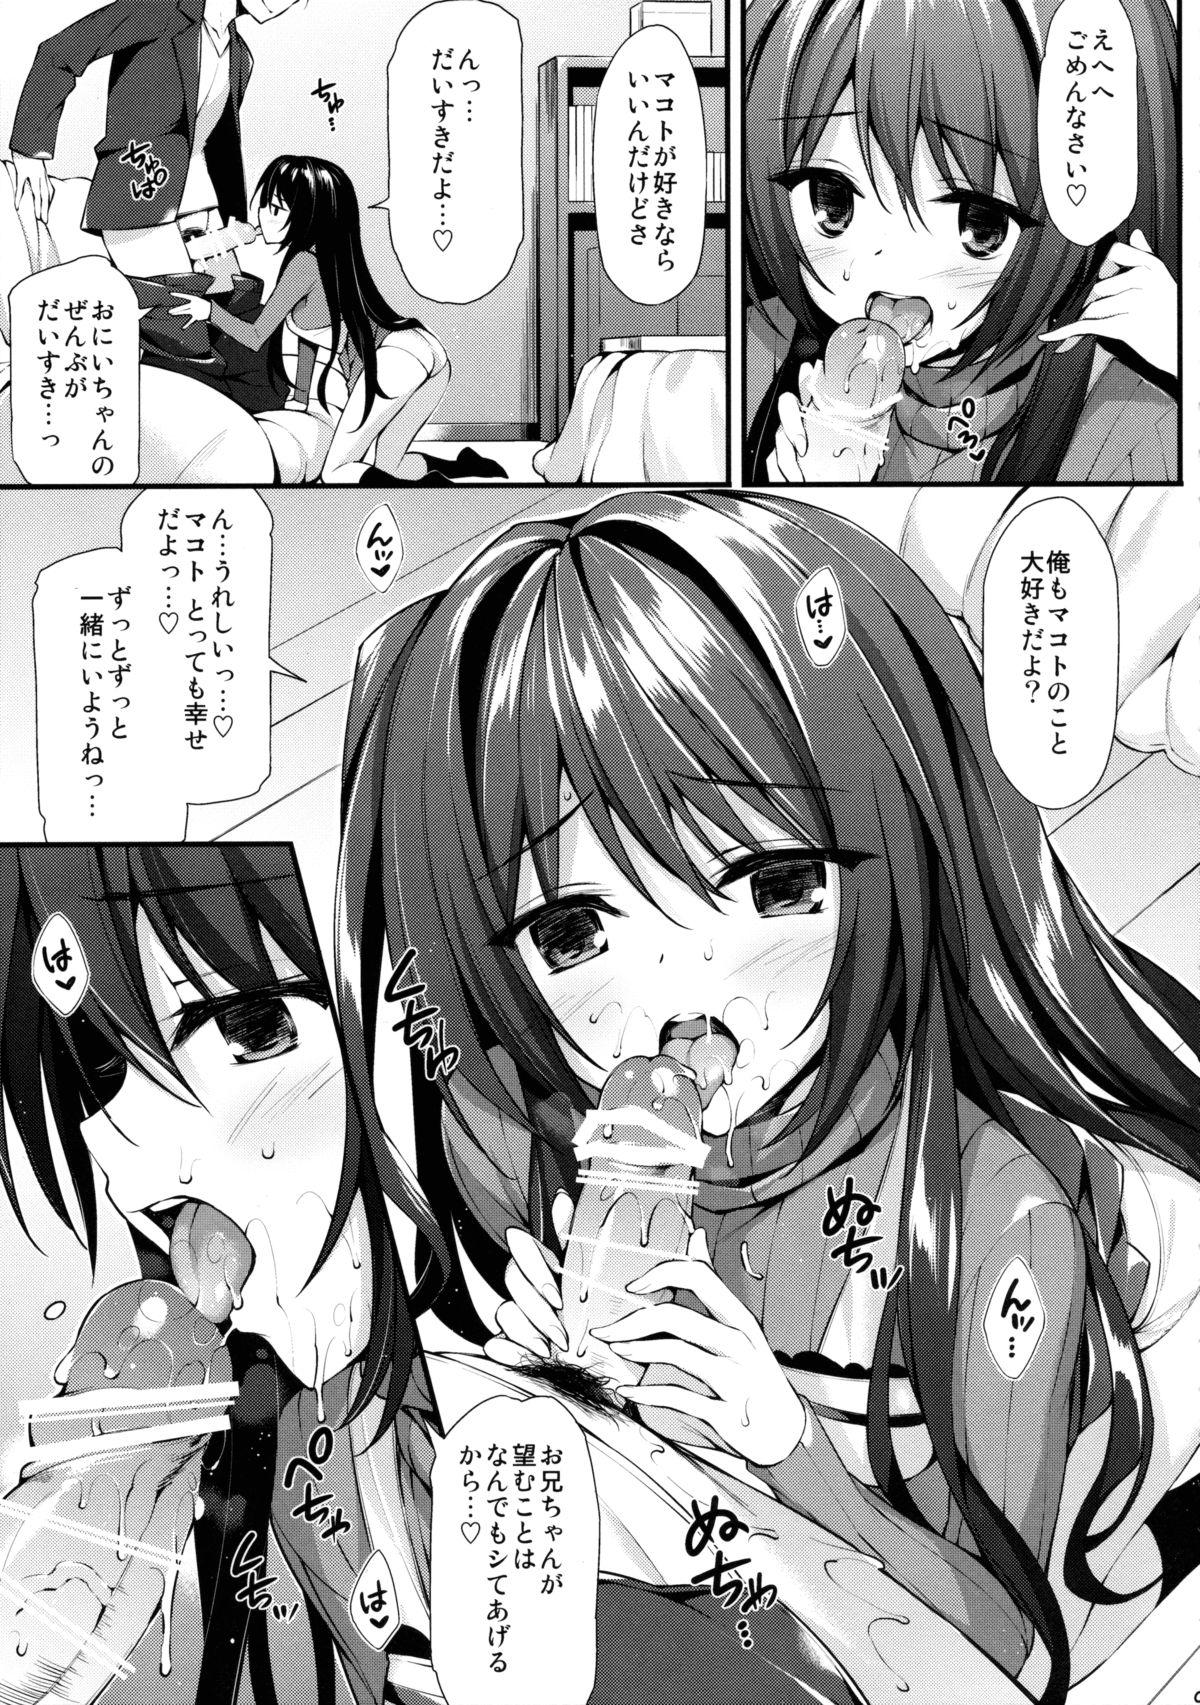 Booty (C89) [P:P (Oryou)] Onii-chan Senyou Makoto-chan (Tokyo 7th Sisters) - Tokyo 7th sisters Jerking Off - Page 8